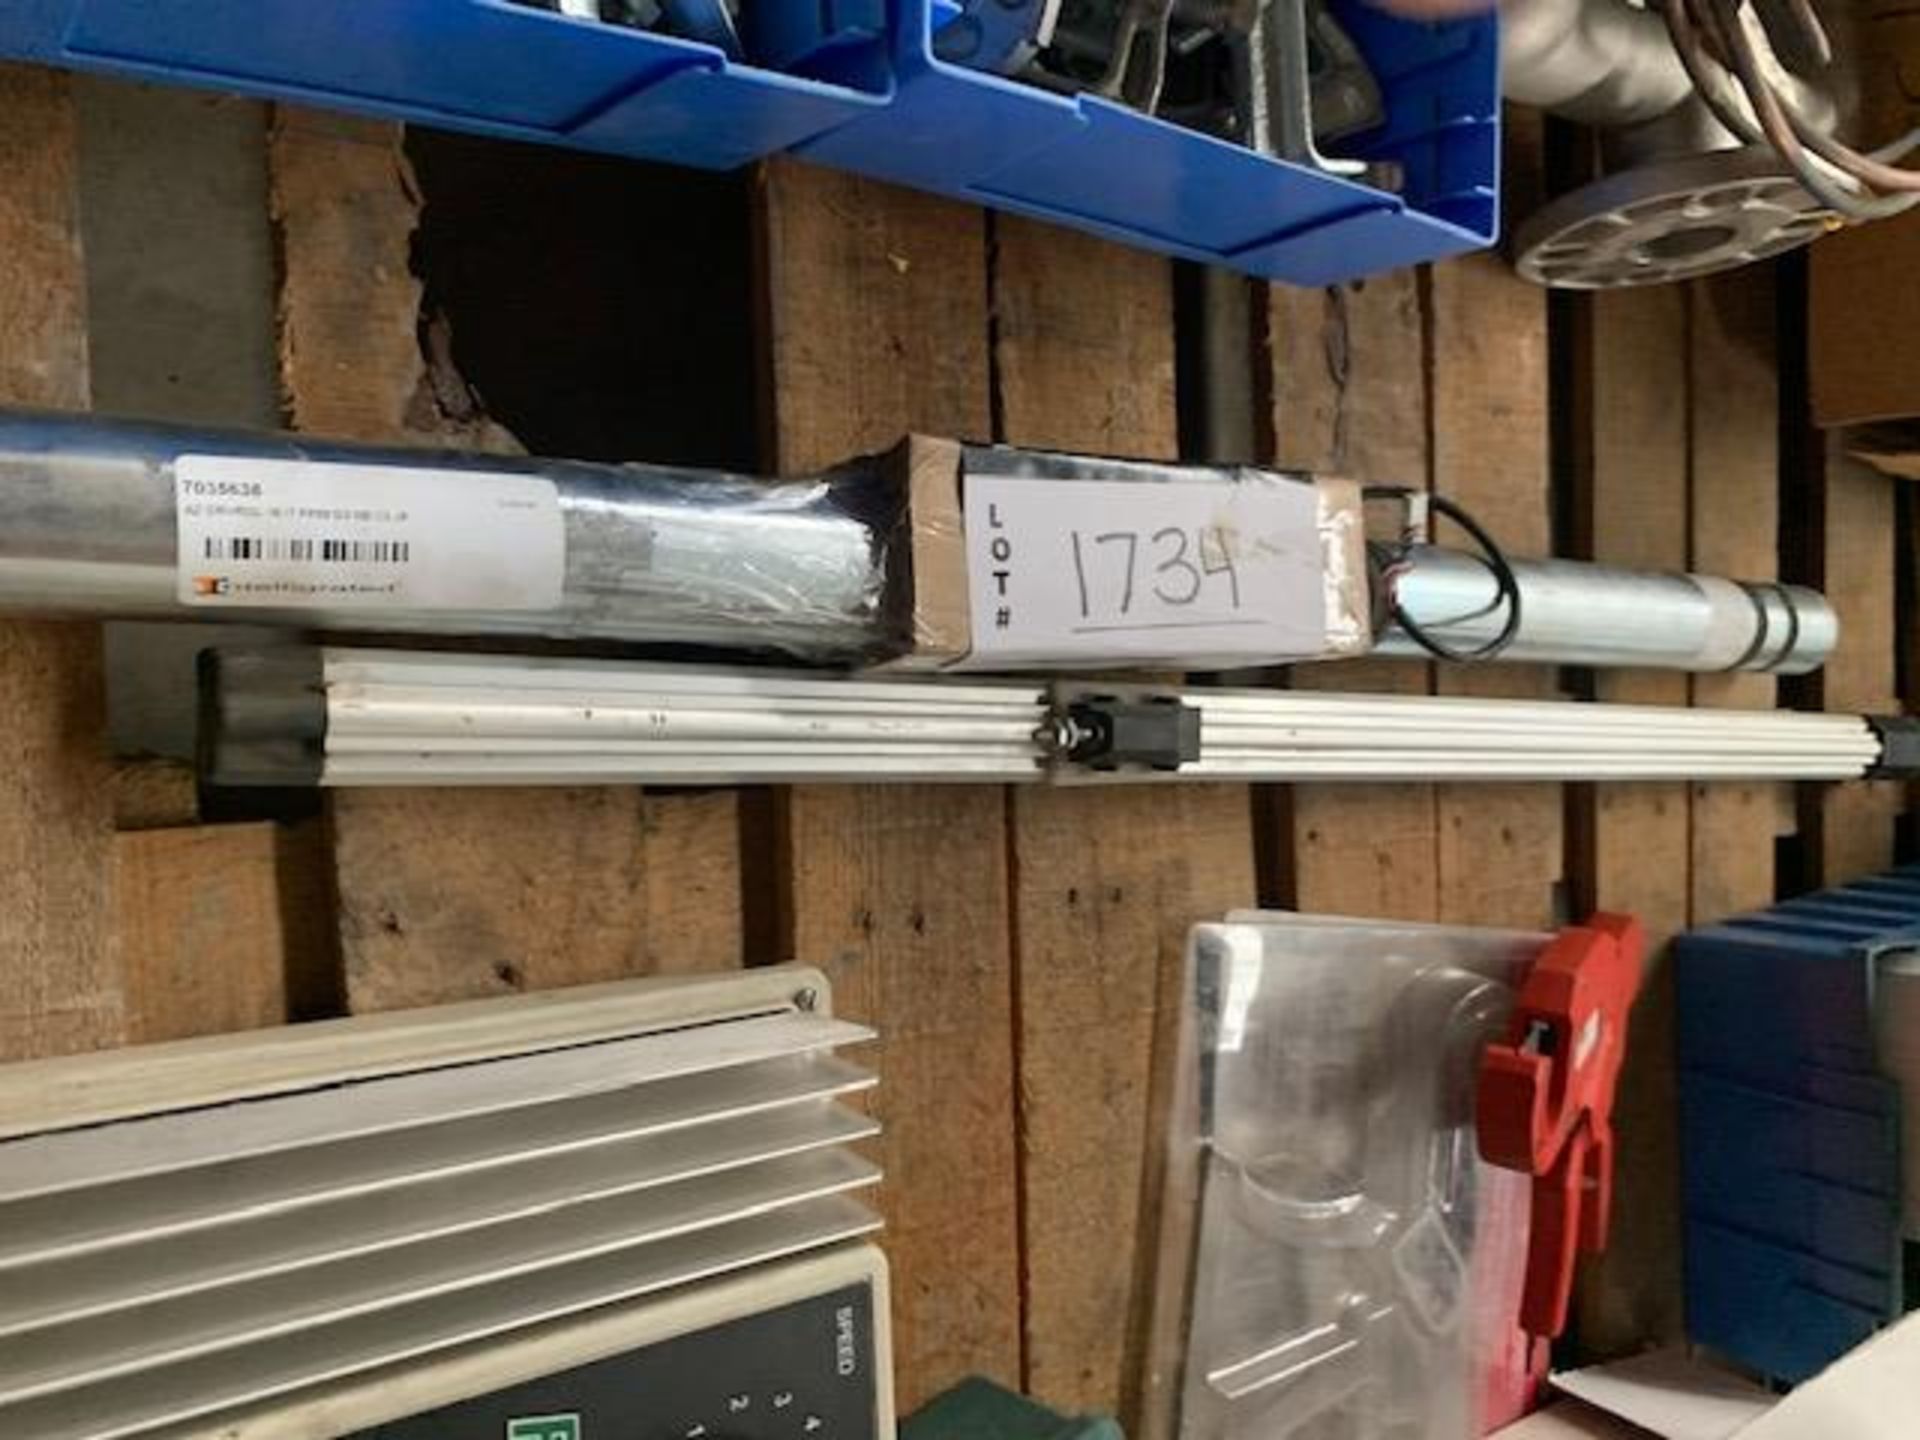 AIR LINEAR RAIL 36” OVERALL LENGTH, 2 MOTORIZED ROLLERS 14 1/2” LONG 2” DIAMETER, RIGGING FEE $10.